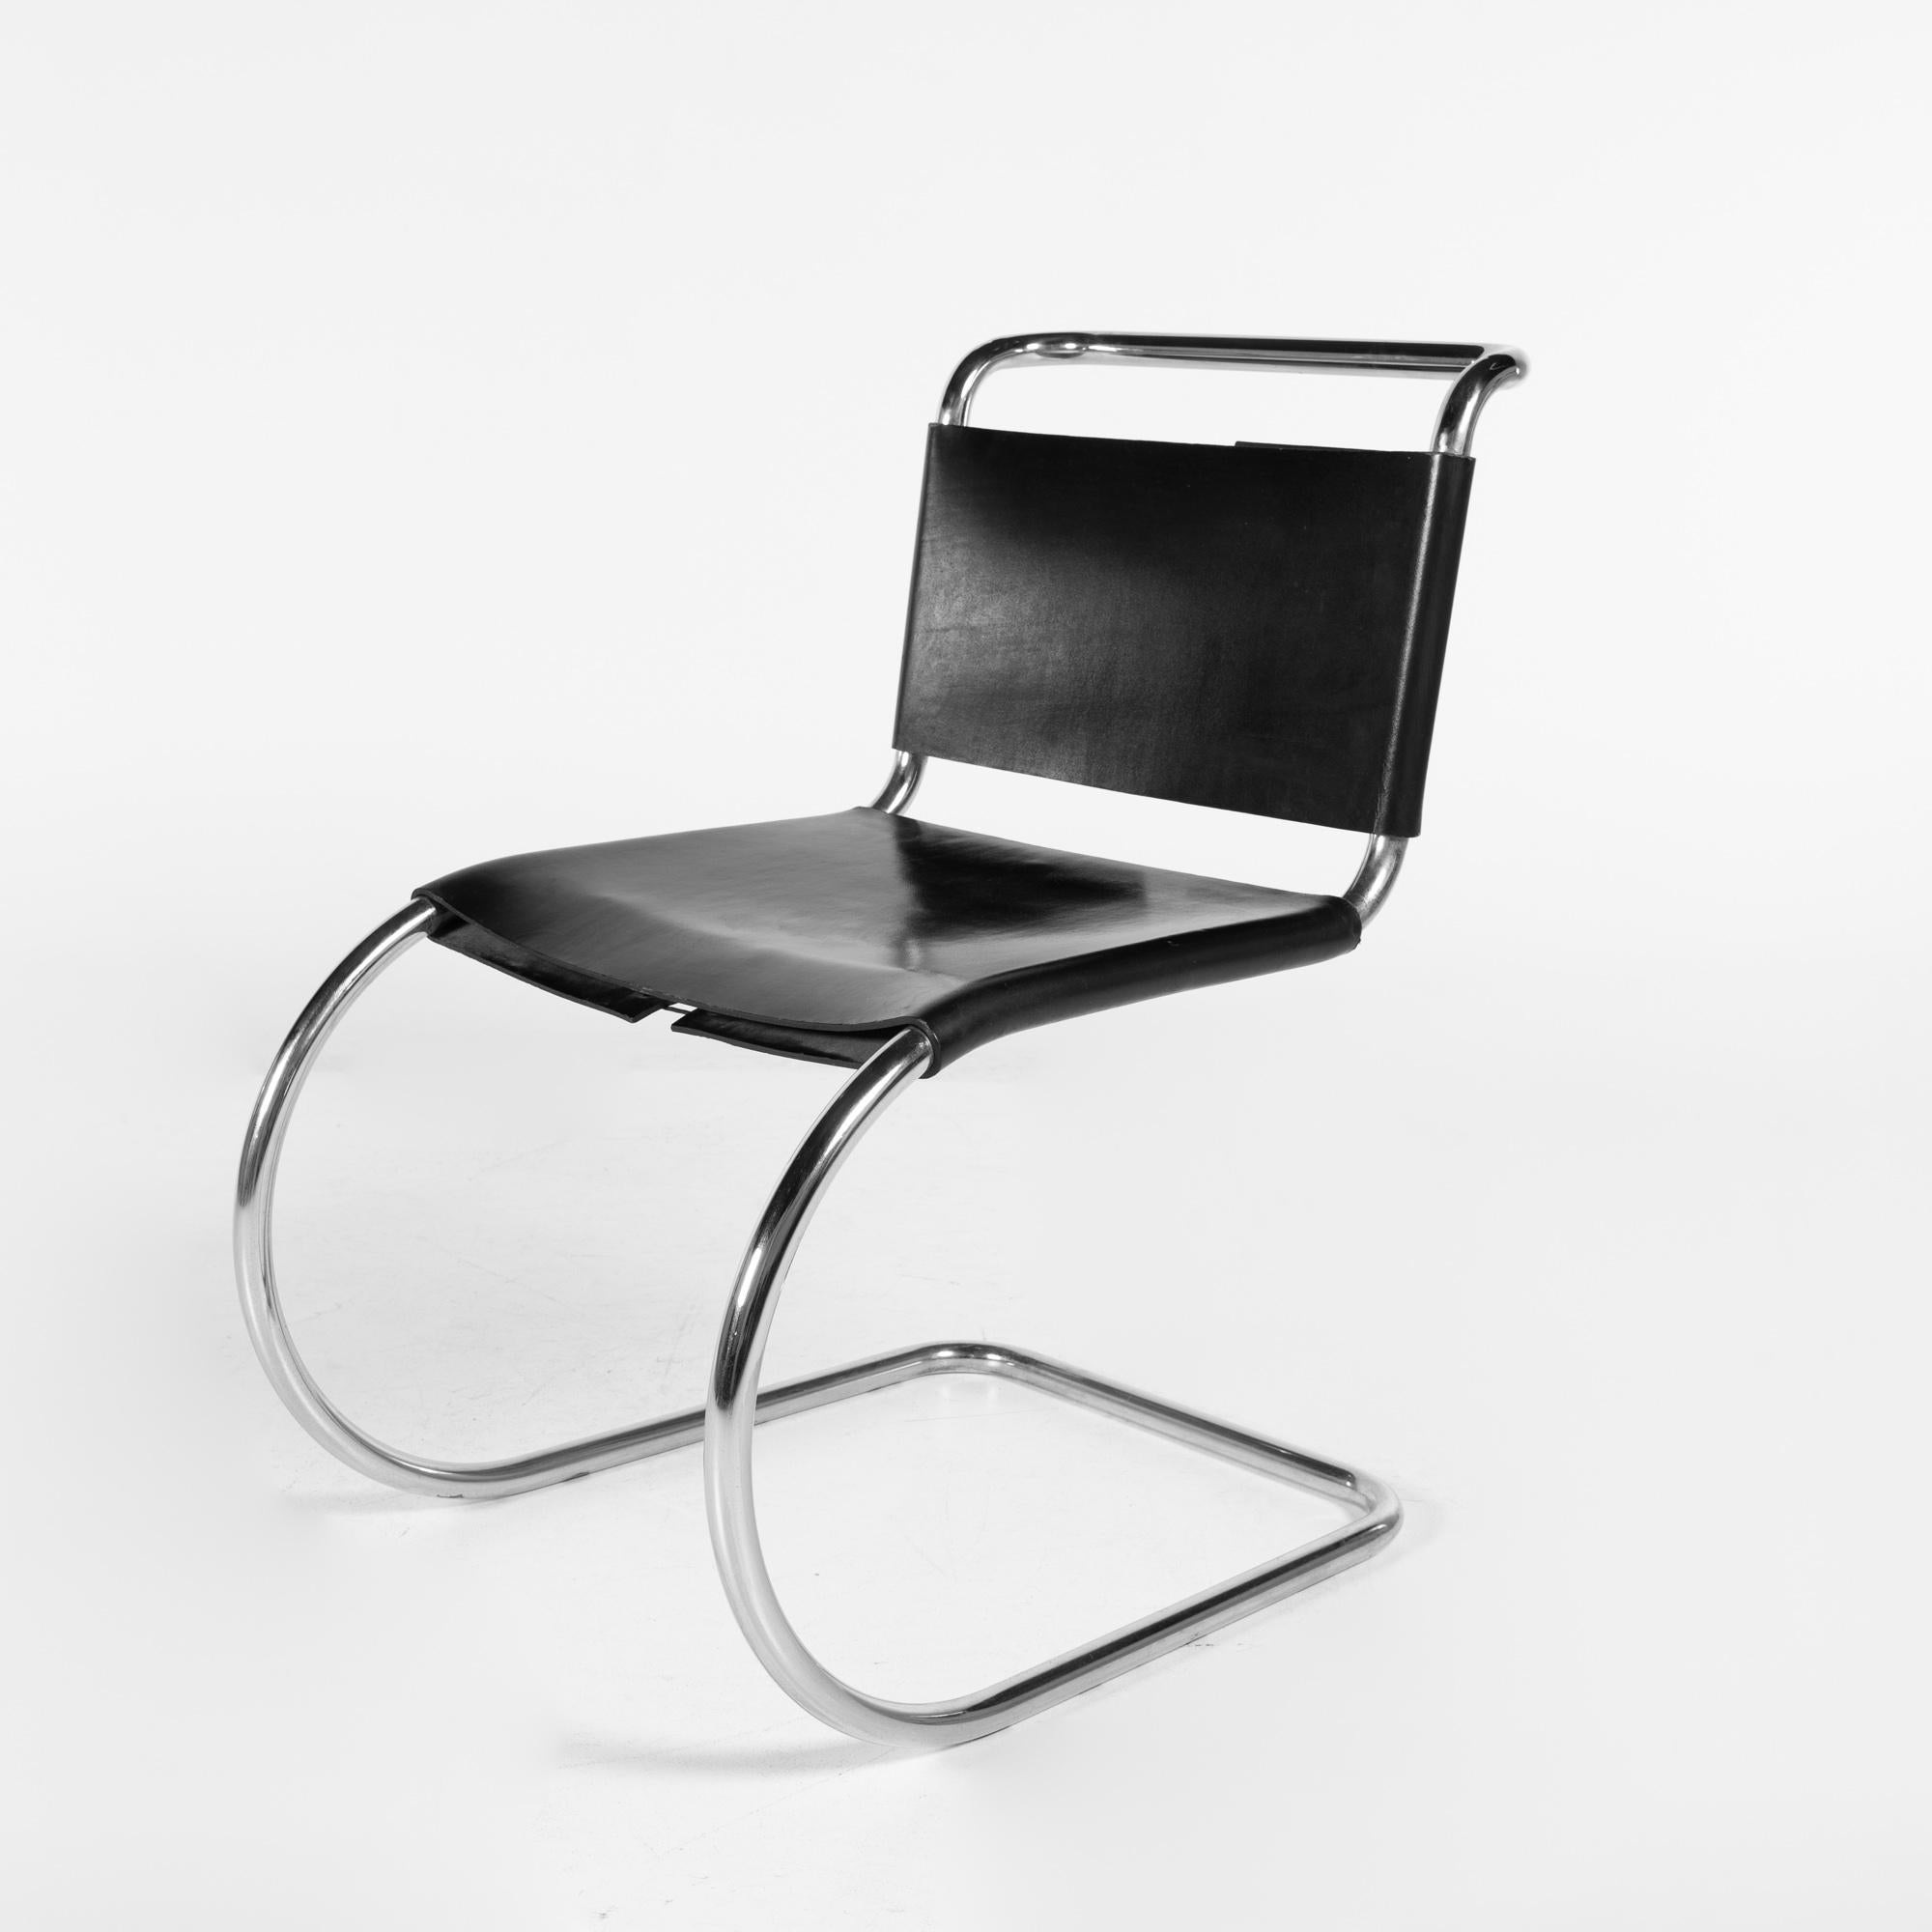 Late 20th Century Mart Stam for Fasem Model S33 Mid Century Leather and Chrome Cantilever Chairs